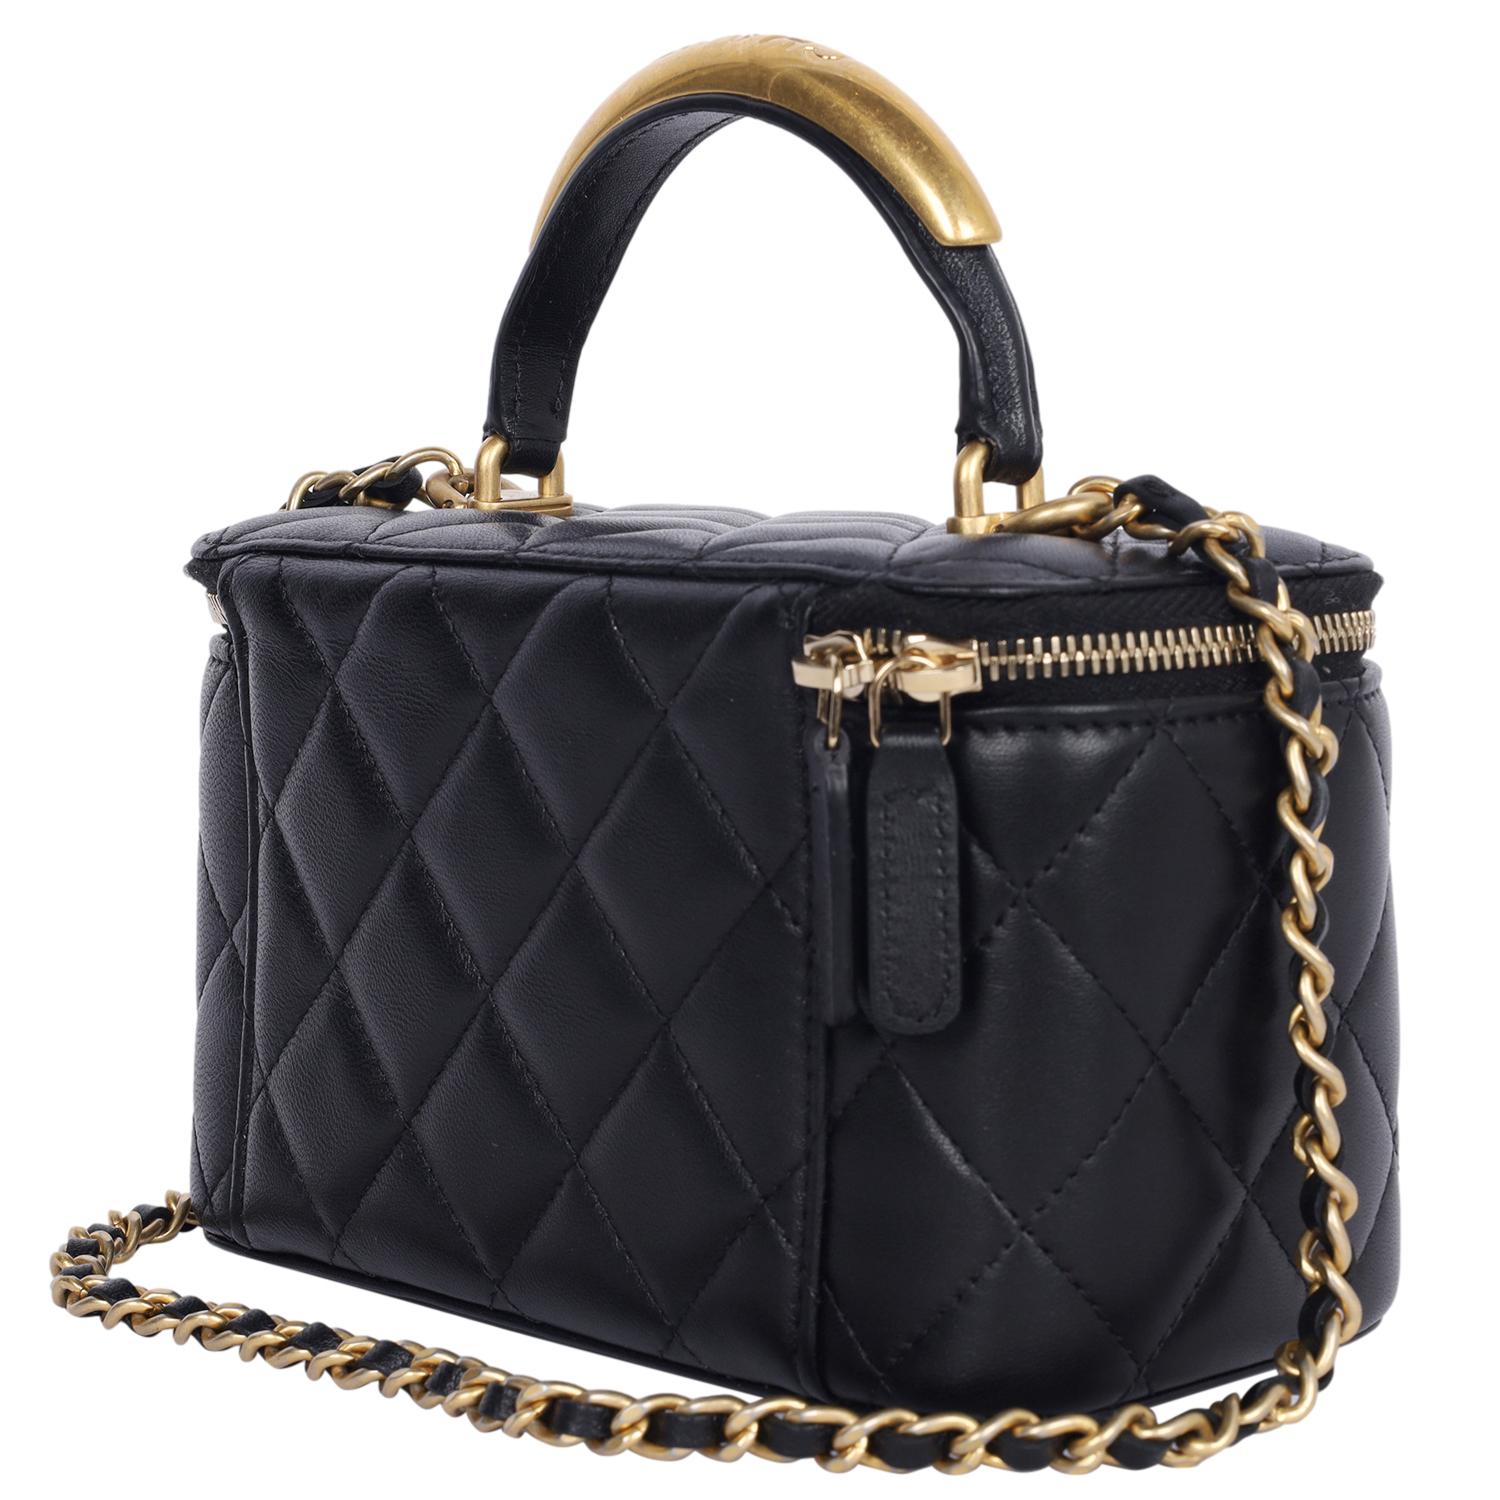 Chanel Lambskin Quilted Small Top Handle Vanity Case Black Crossbody Bag 5